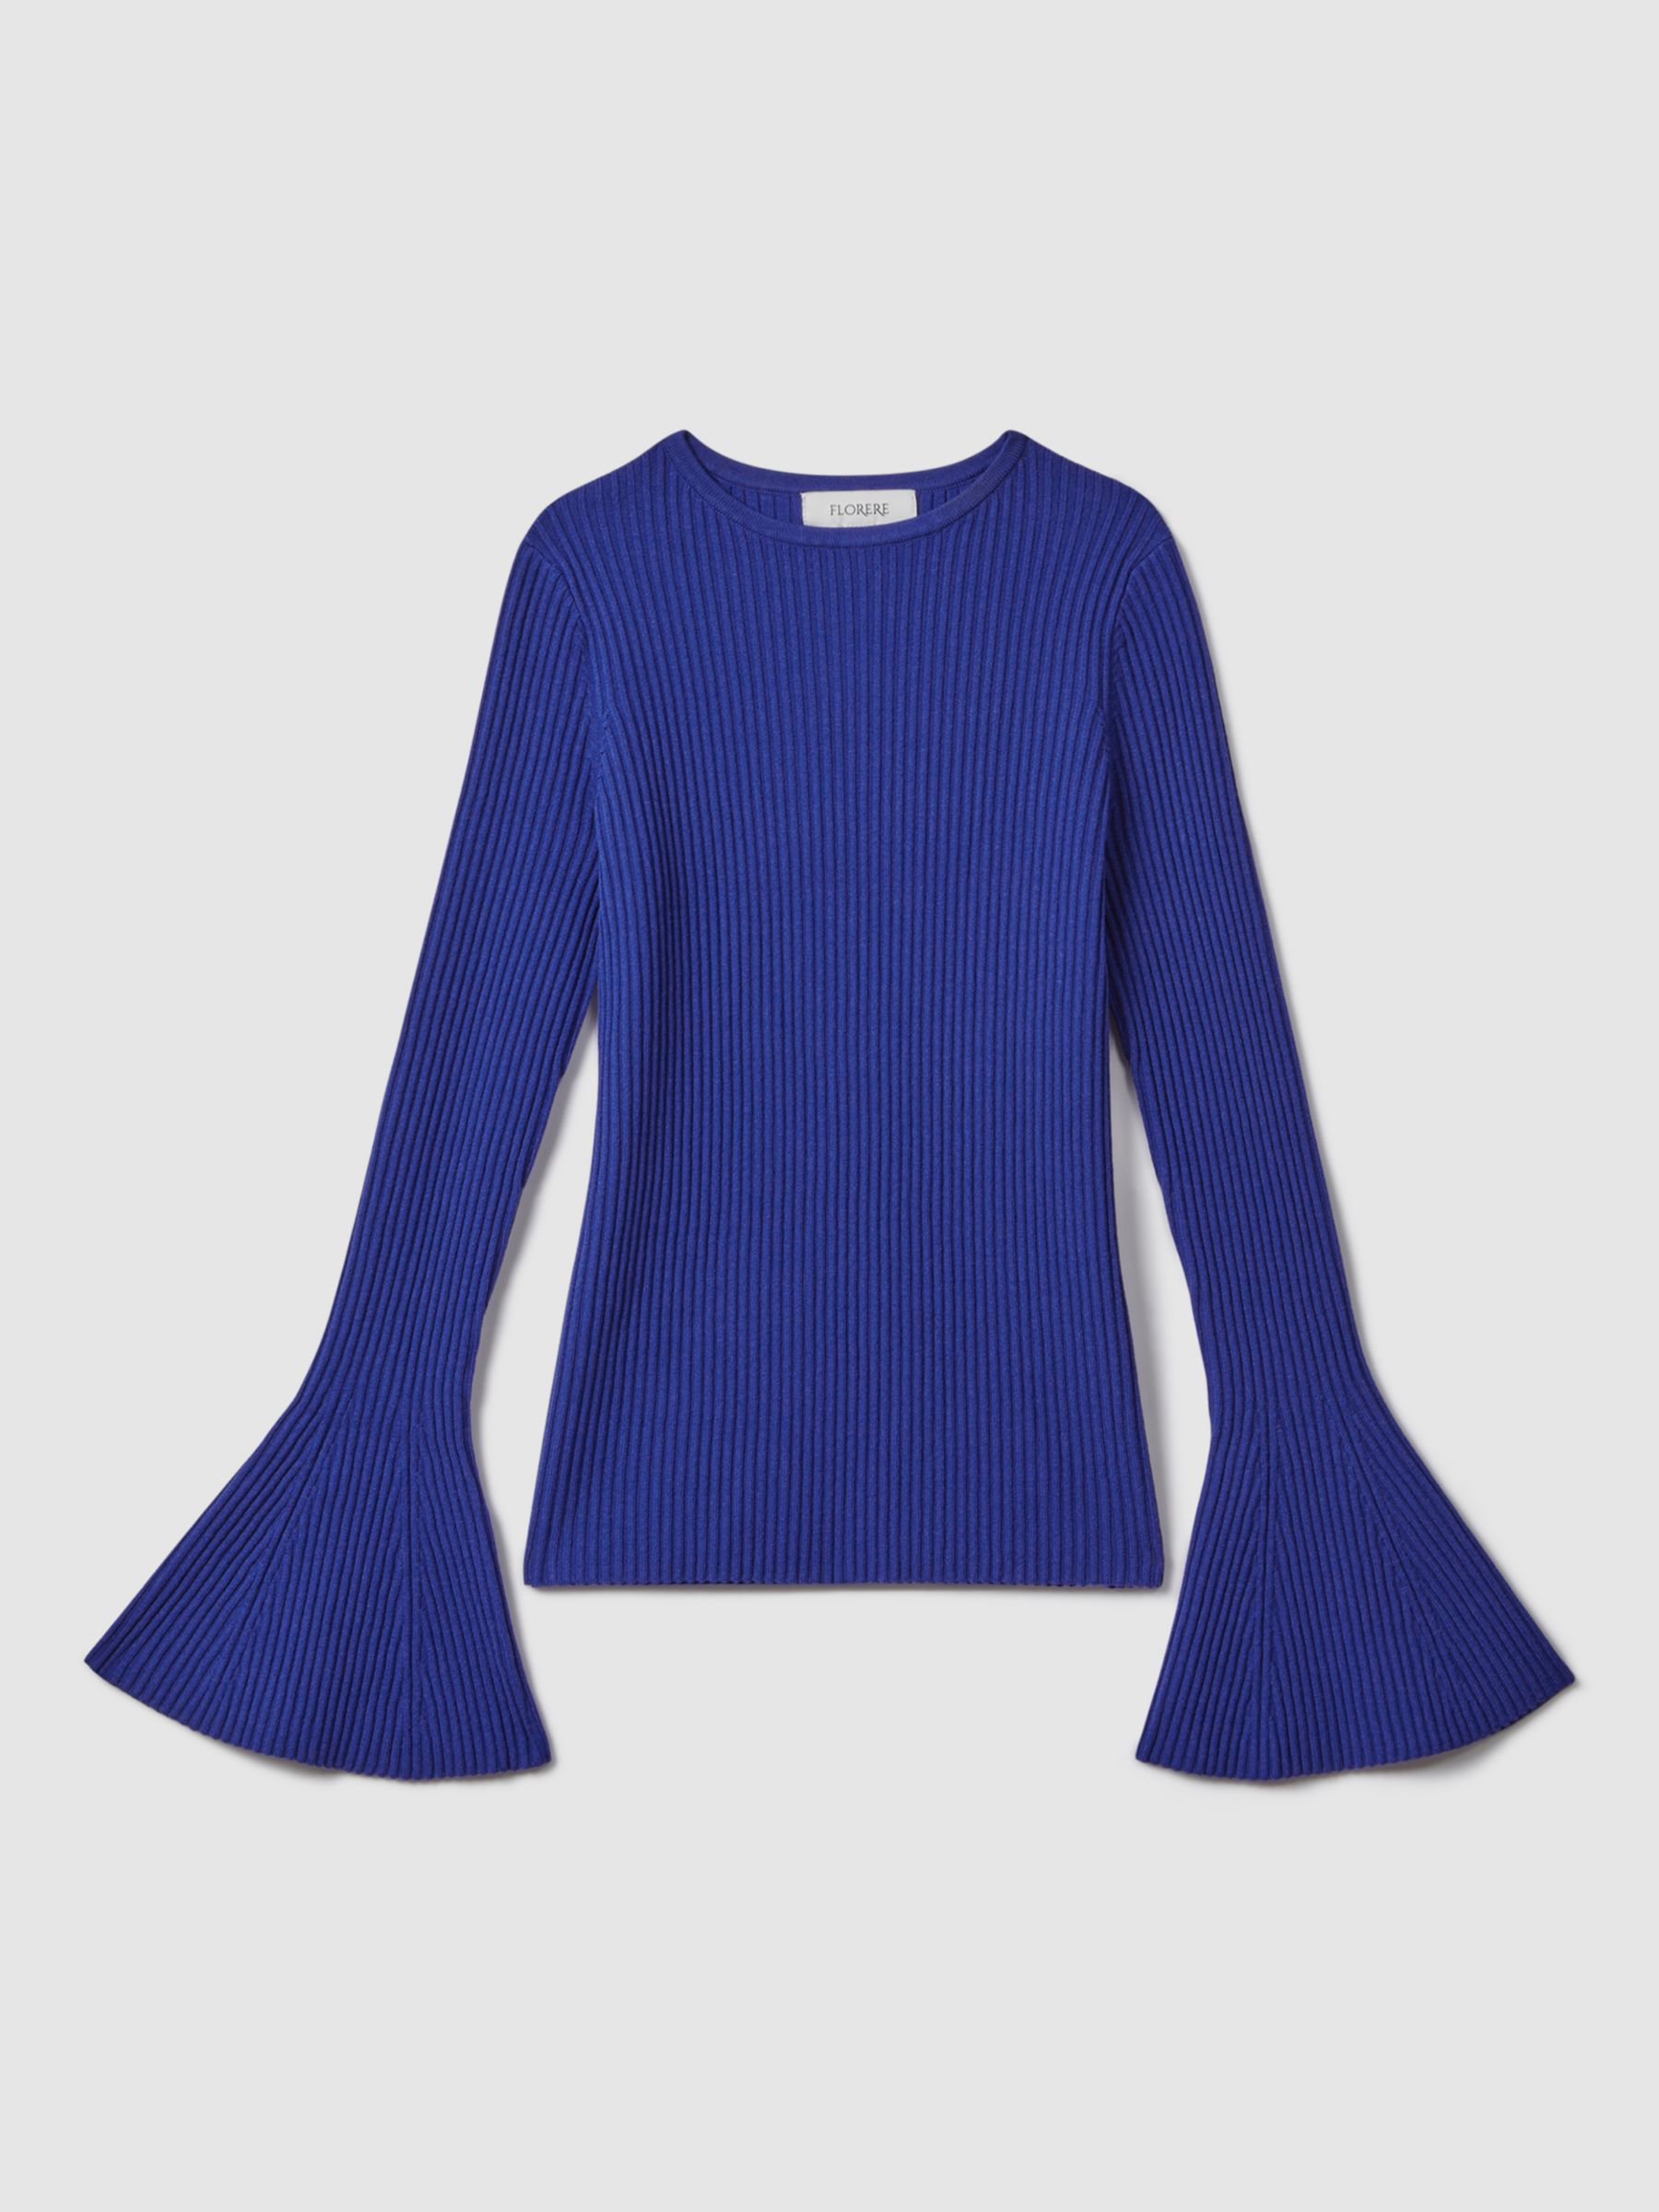 FLORERE Ribbed Fluted Cuff Jumper, Bright Blue, 8